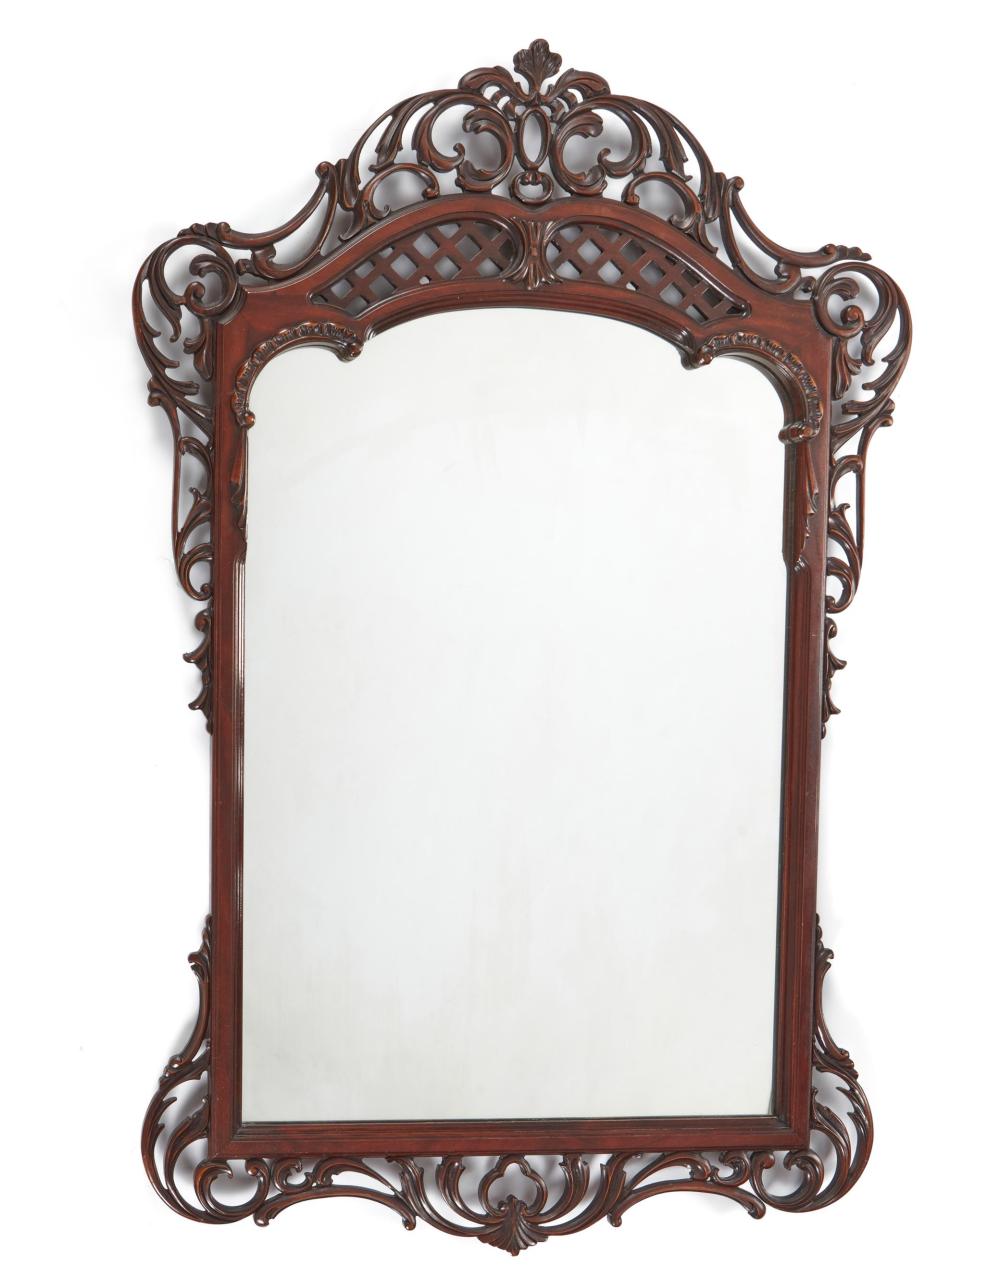 A FRENCH LOUIS XV STYLE WALL MIRRORA 344986